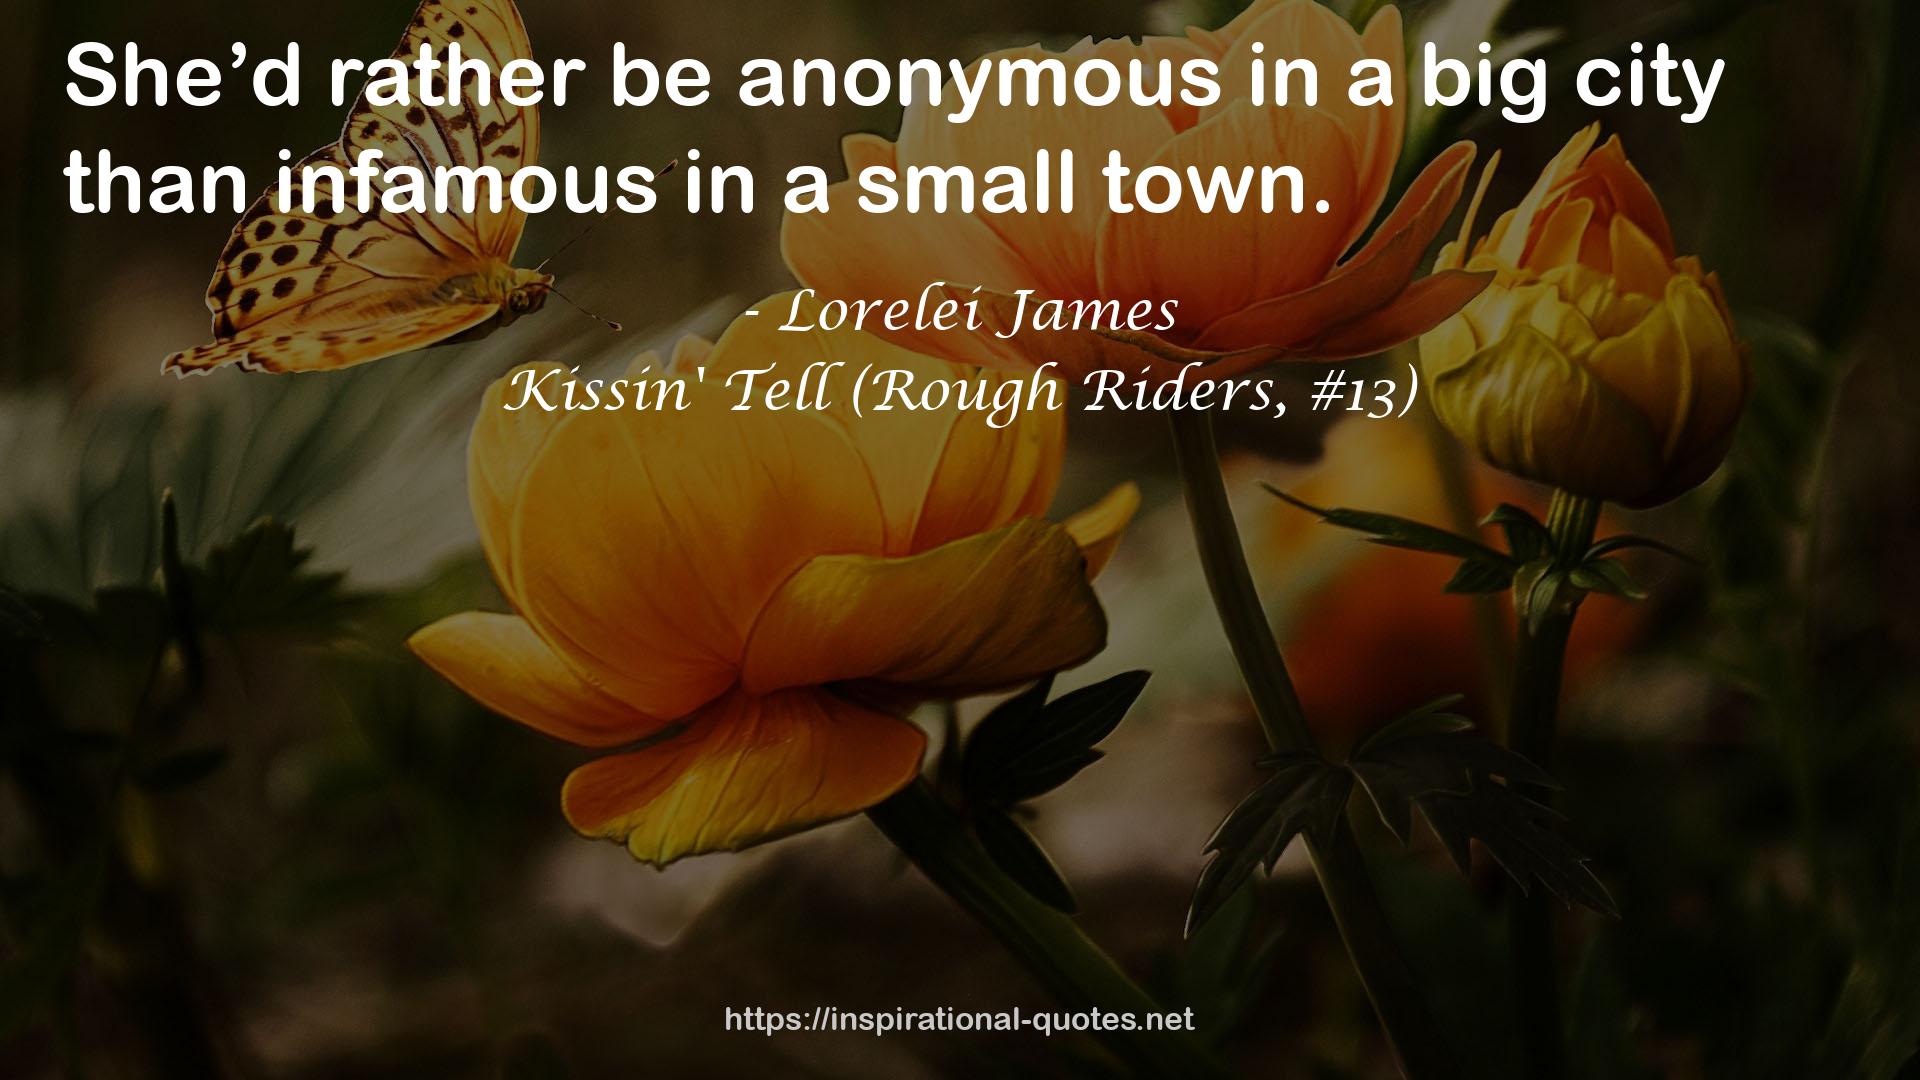 Kissin' Tell (Rough Riders, #13) QUOTES